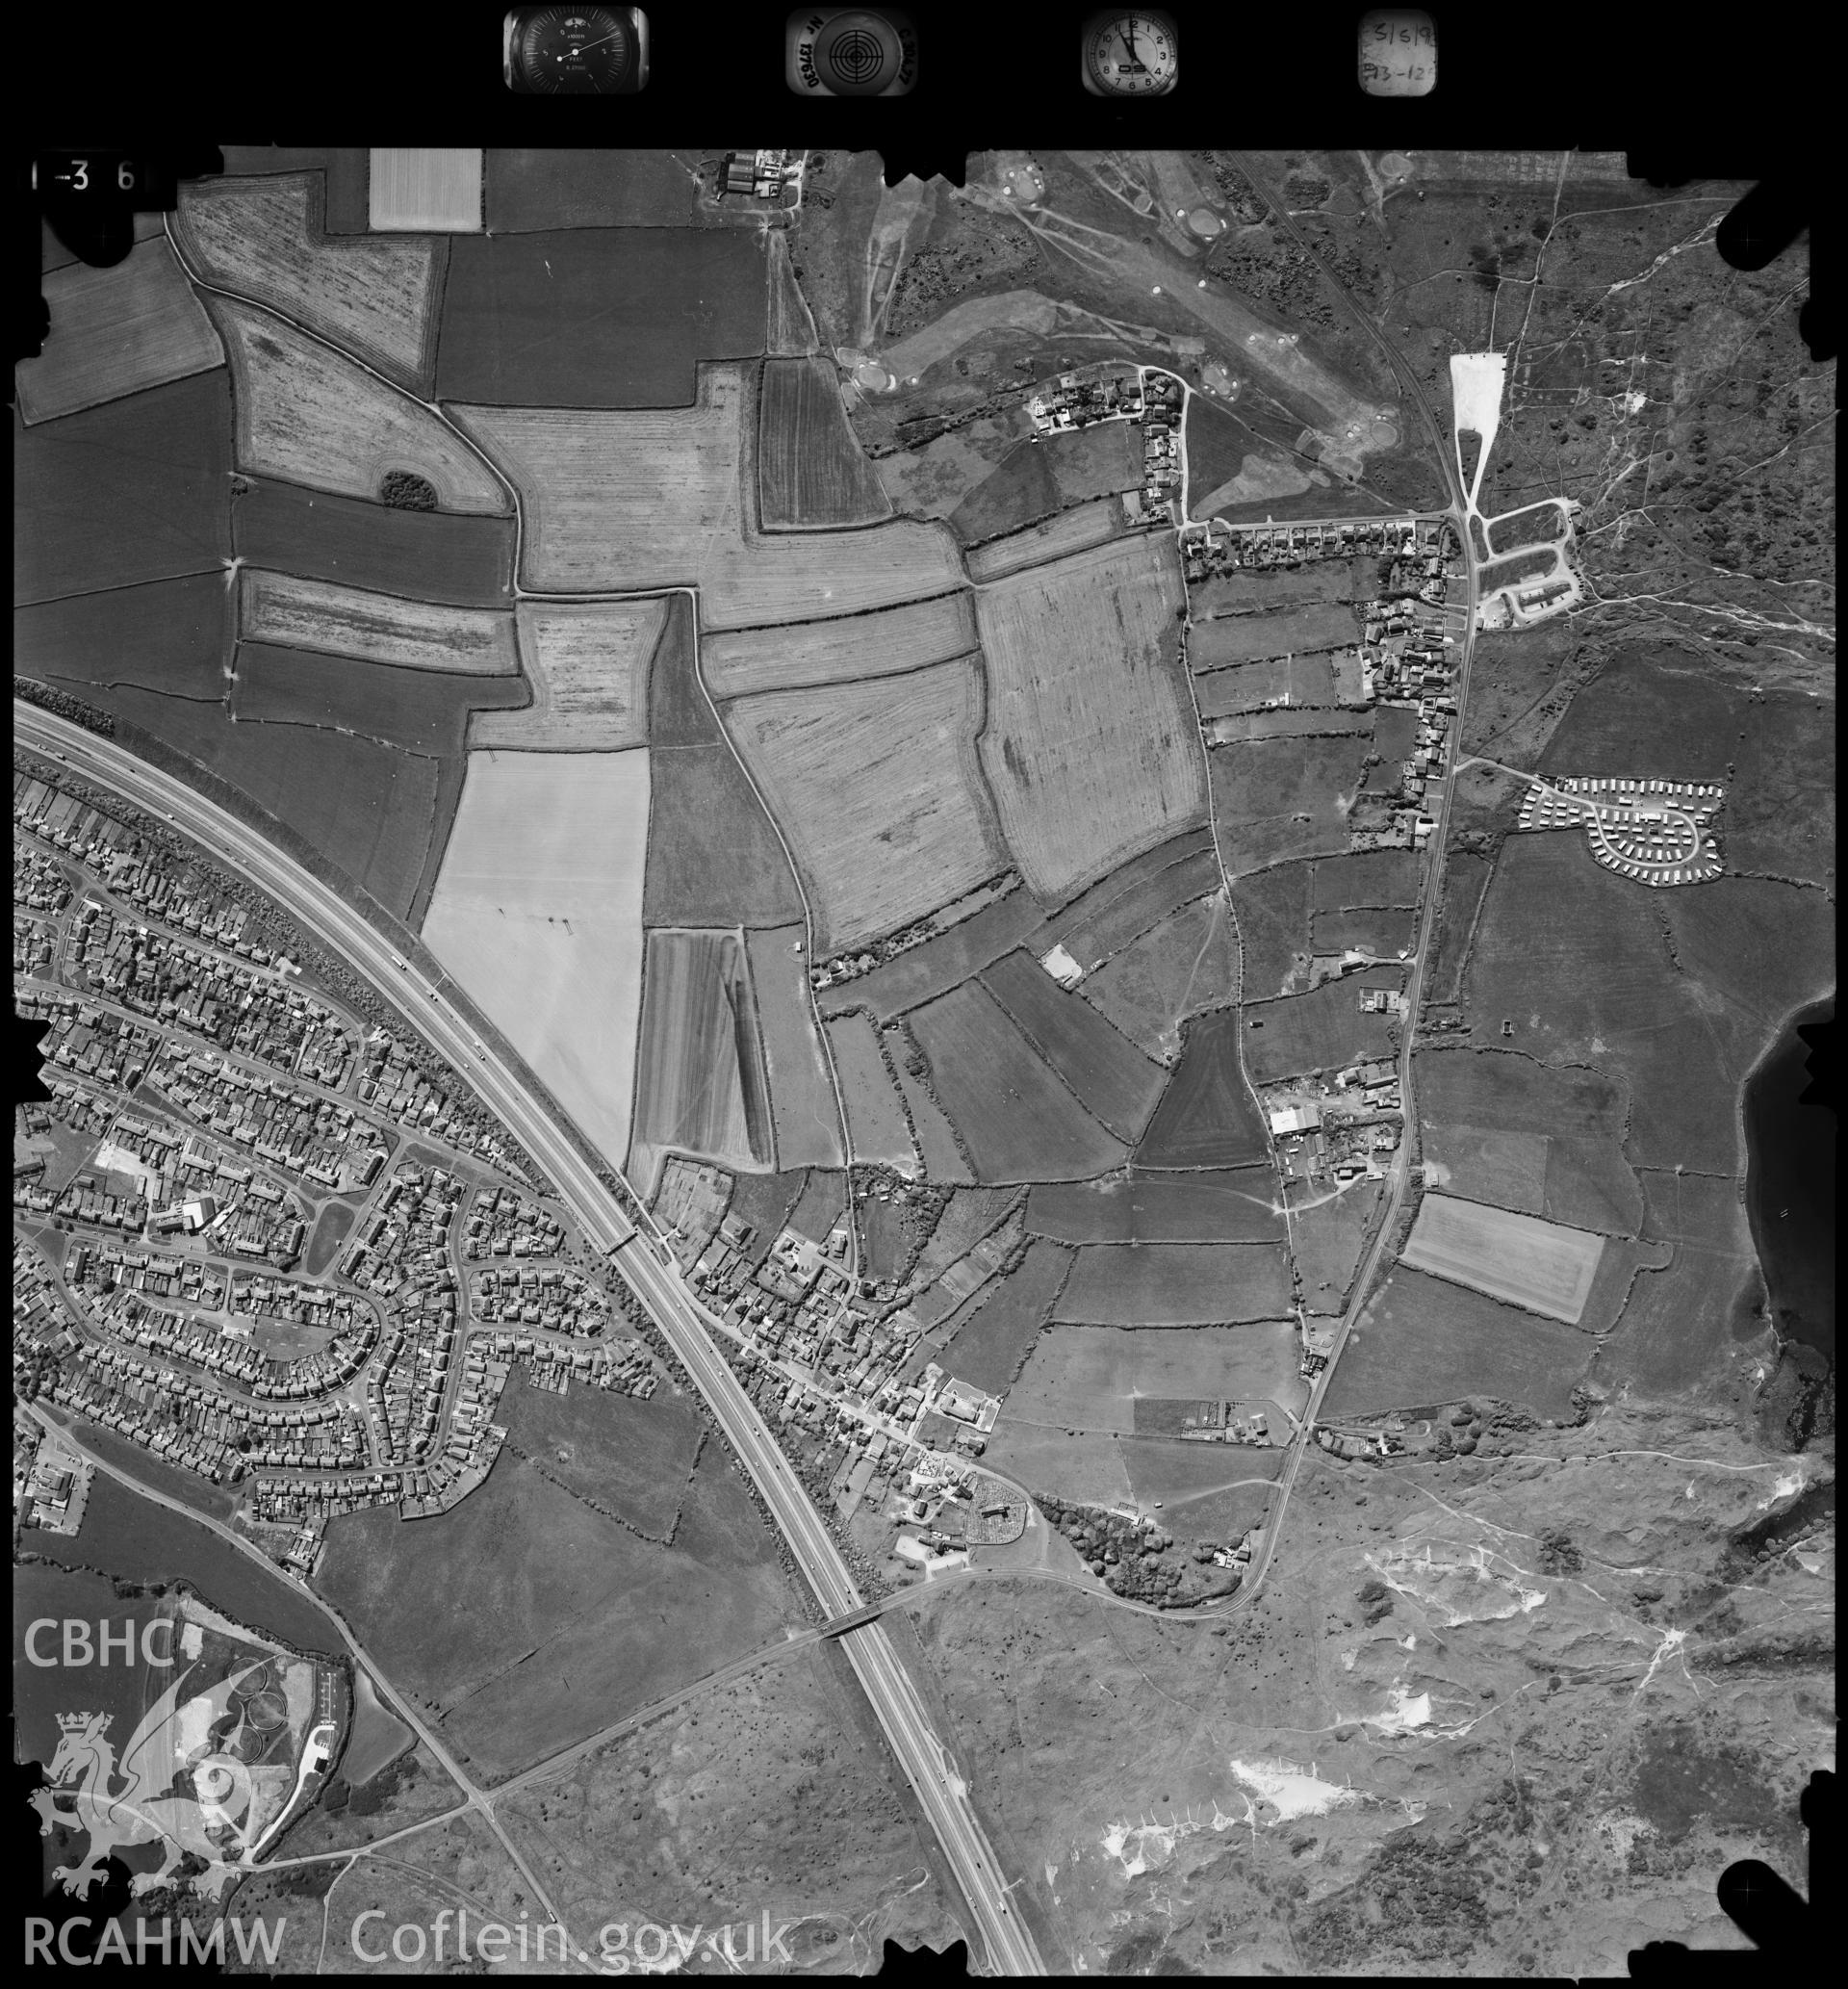 Digitized copy of an aerial photograph showing Kenfig Hill area, taken by Ordnance Survey, 1993.